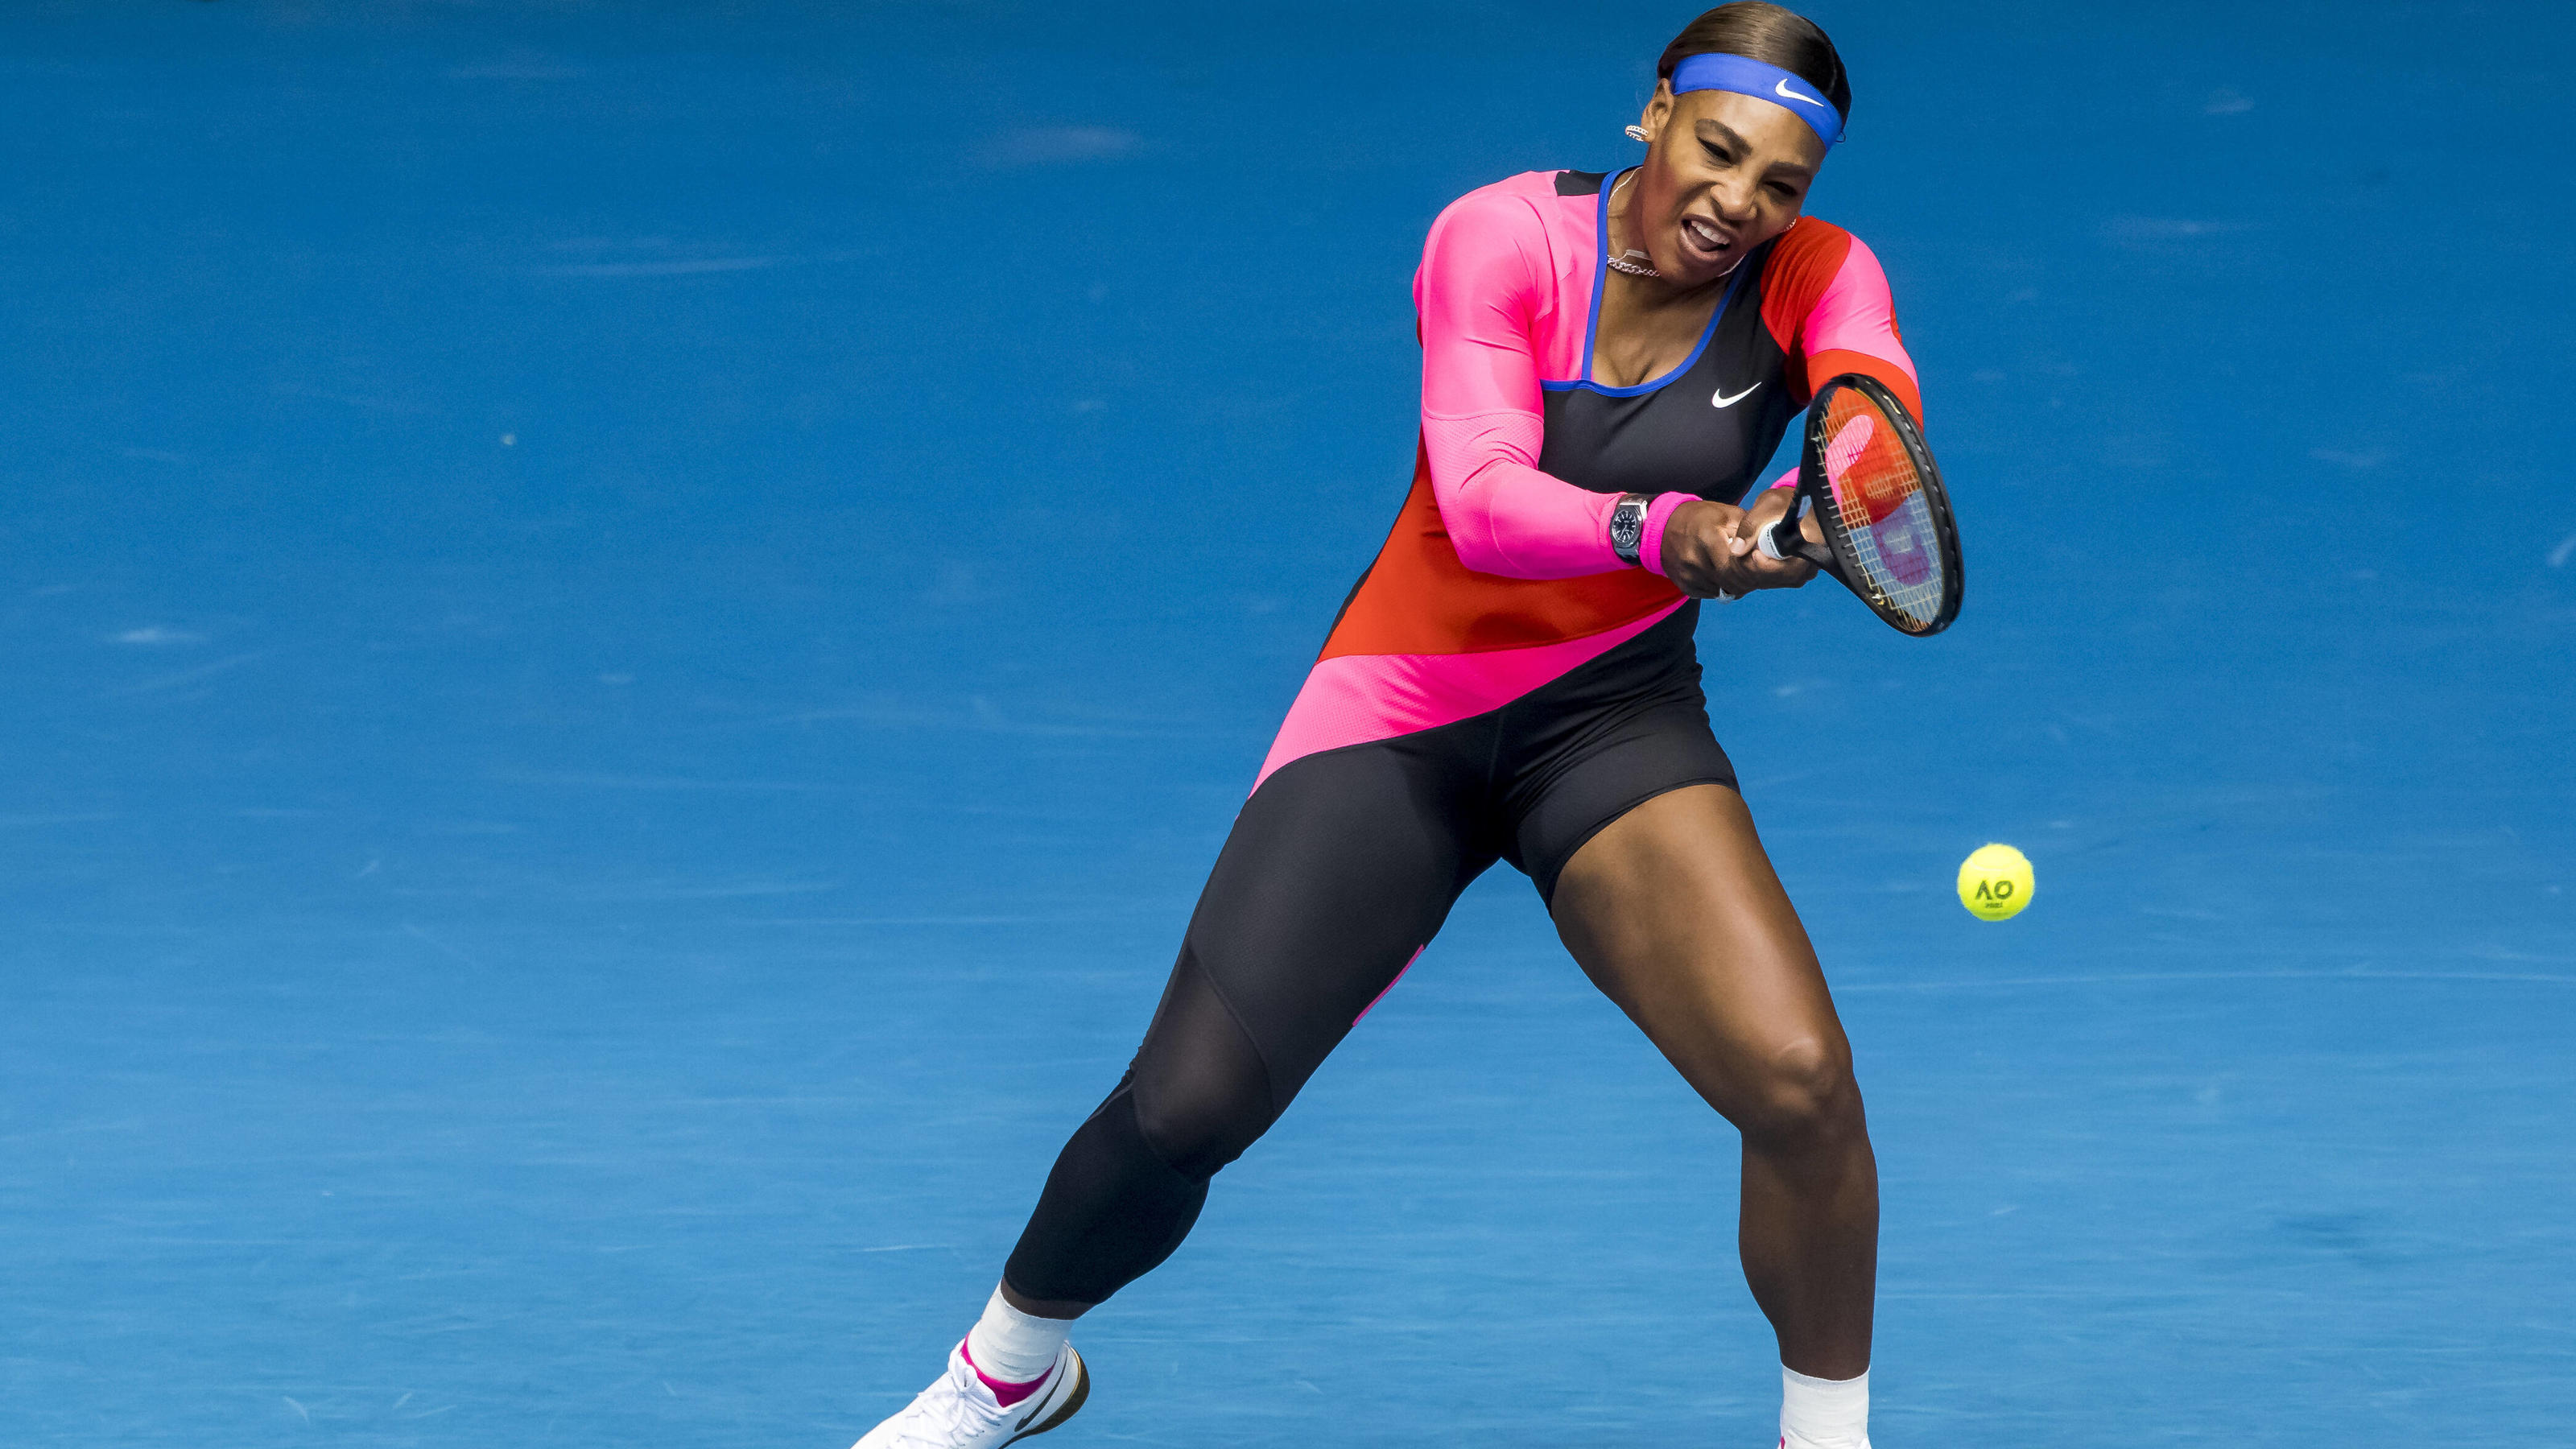 Serena Williams Outfit Australian Open 2021 - Serena and ...